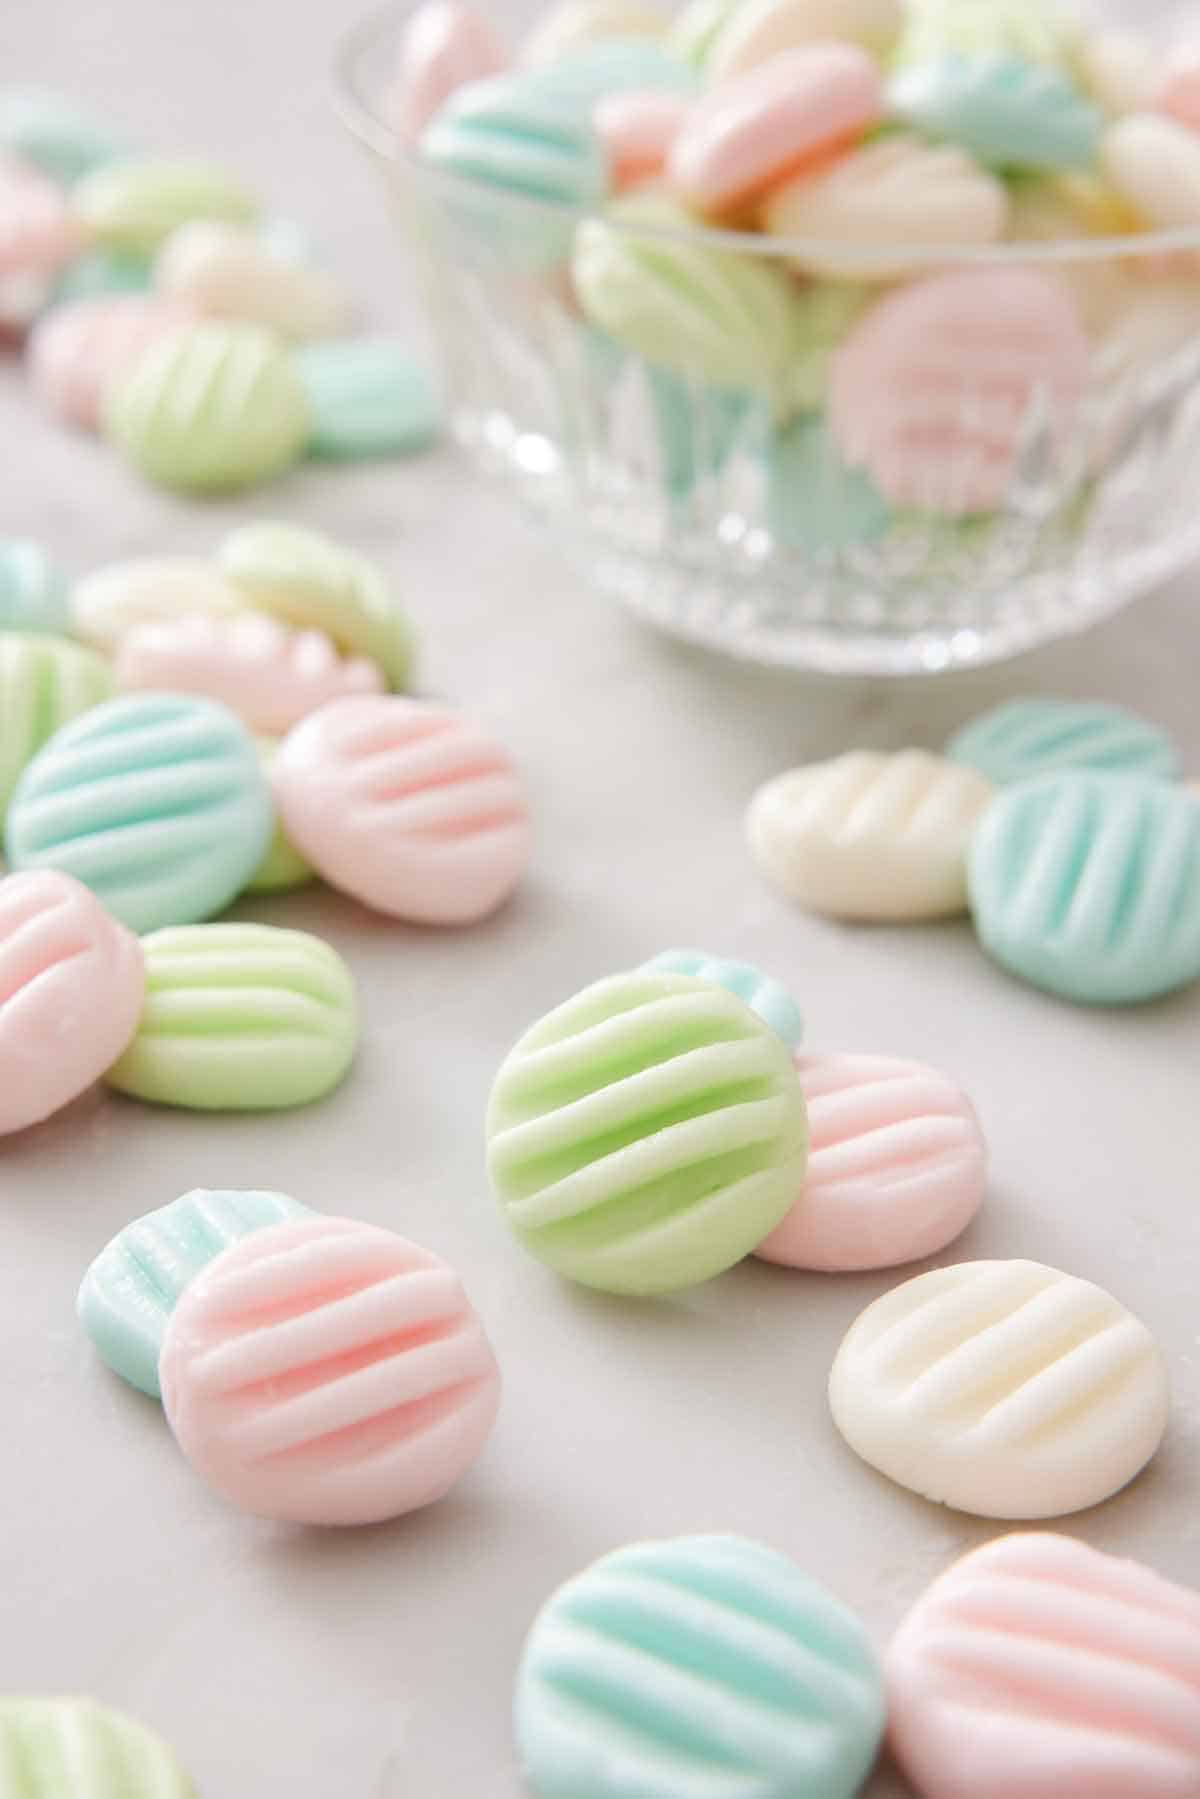 Multiple cream cheese mints in different colors on a marble surface with a bowl with more in the background.